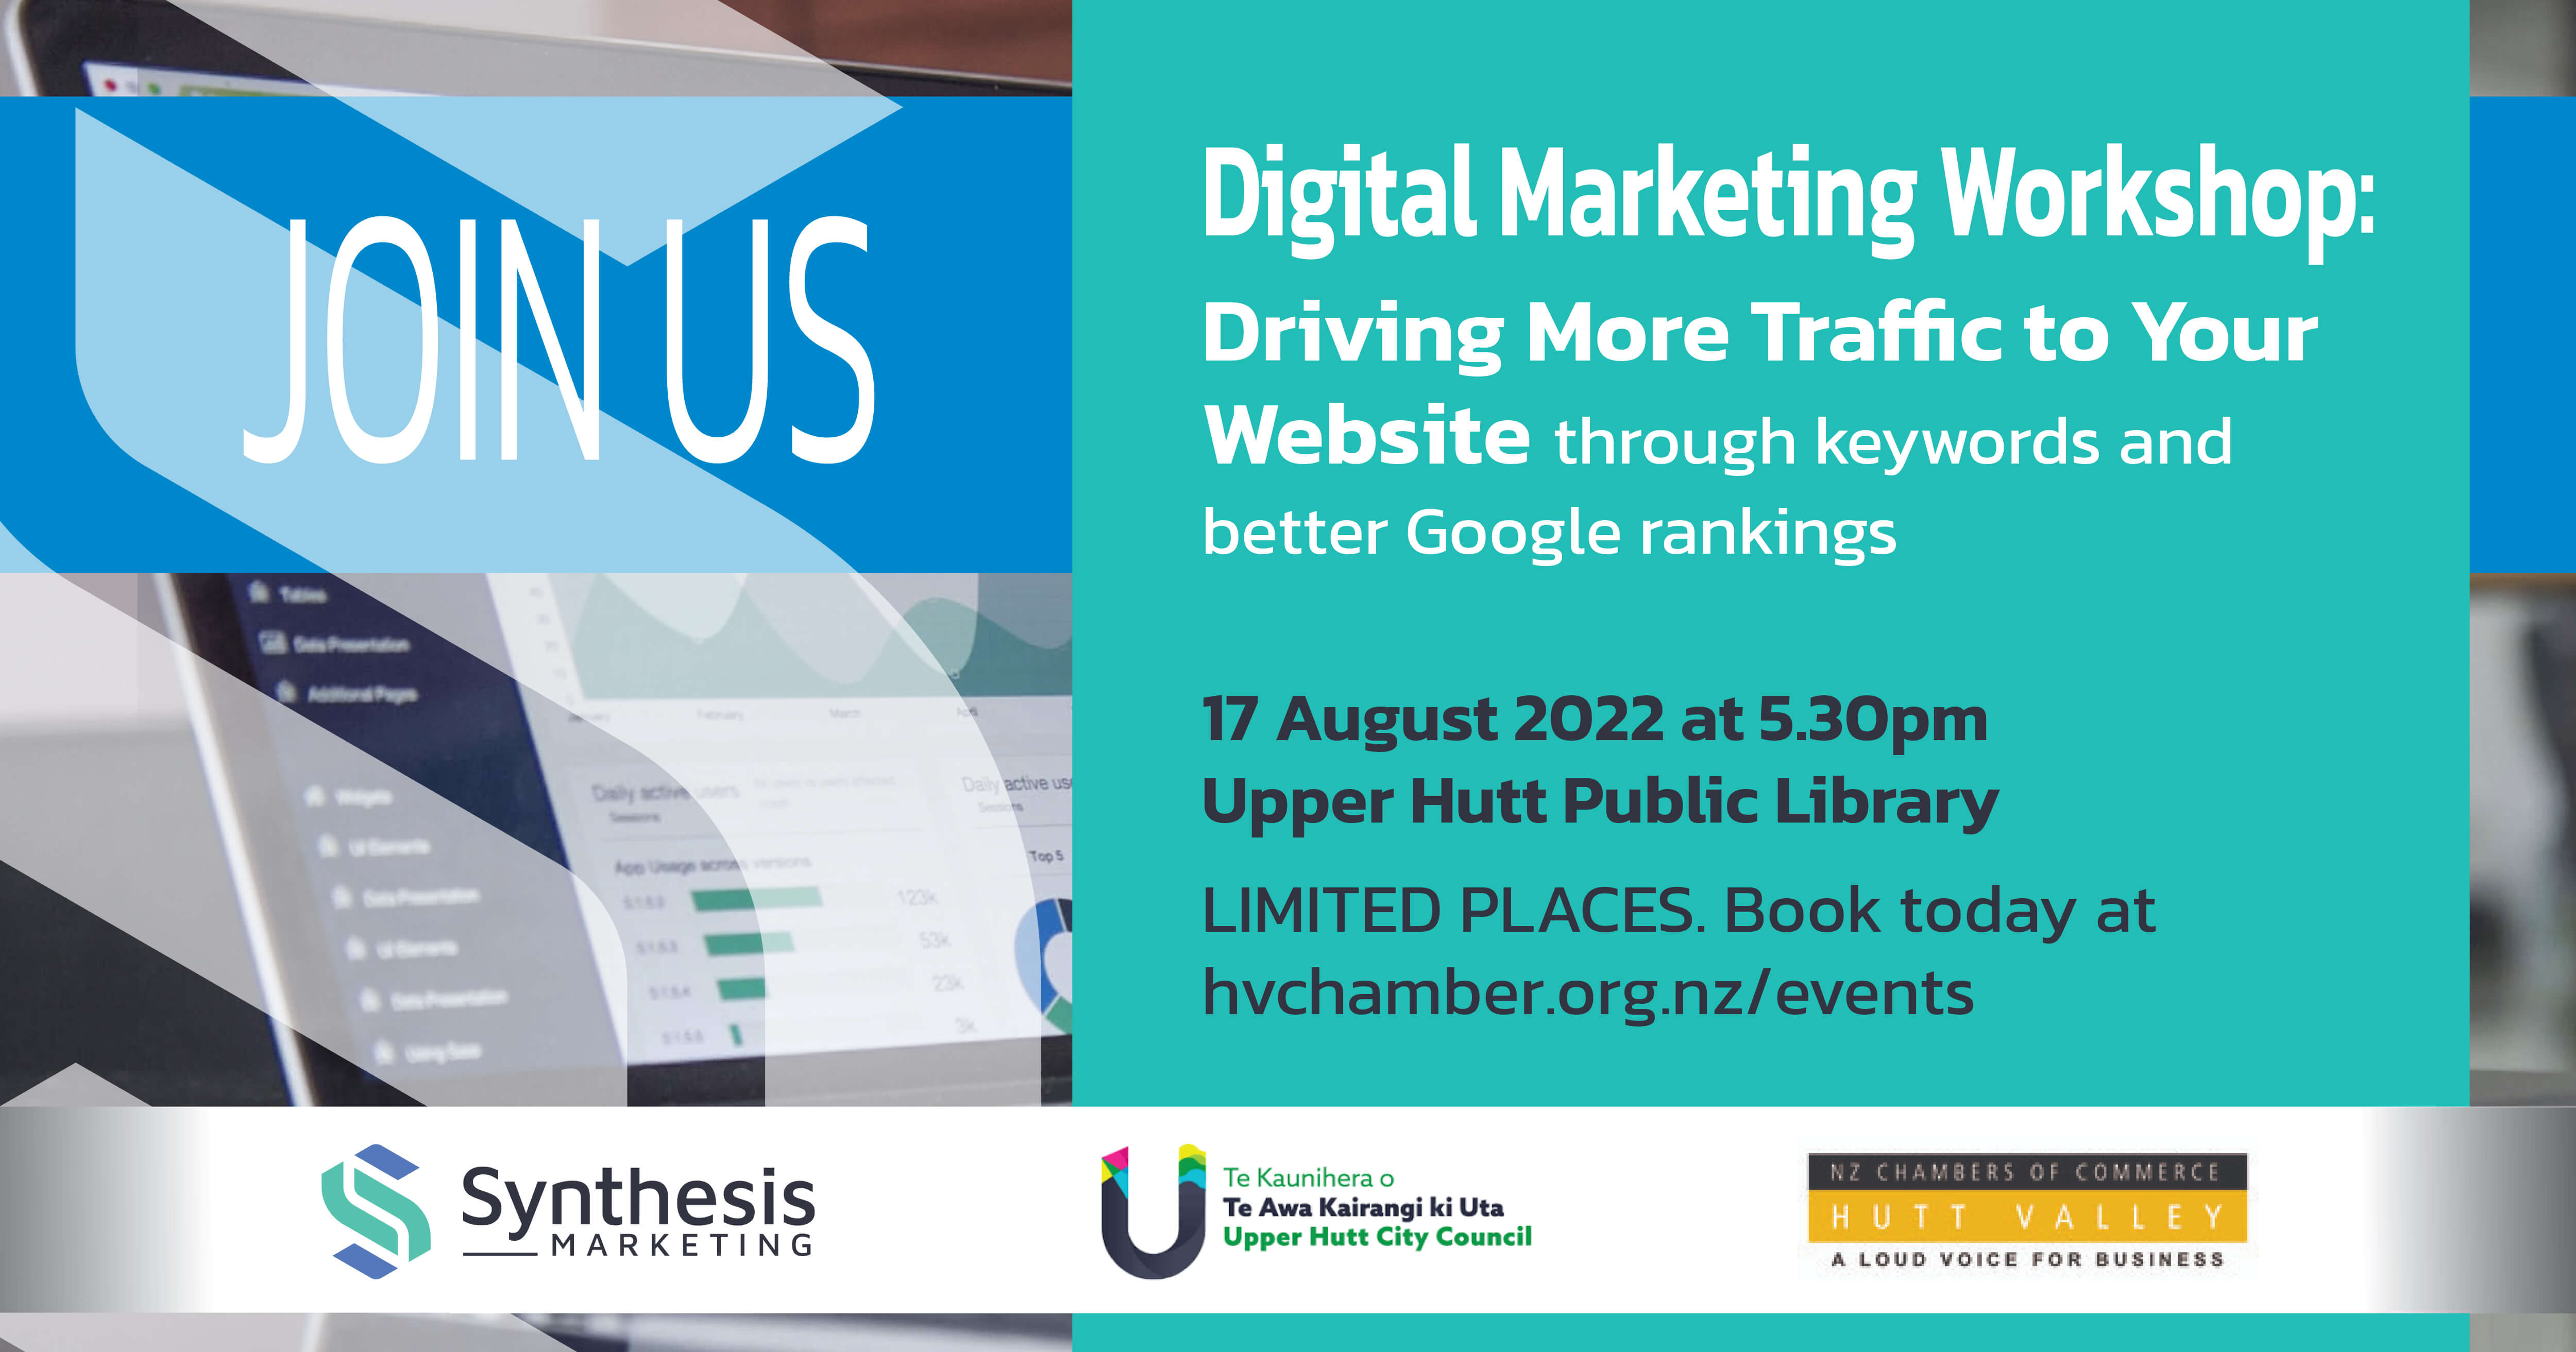 Digital Marketing Workshop: Driving Traffic To Your Website Through Keywords and Better Google Rankings